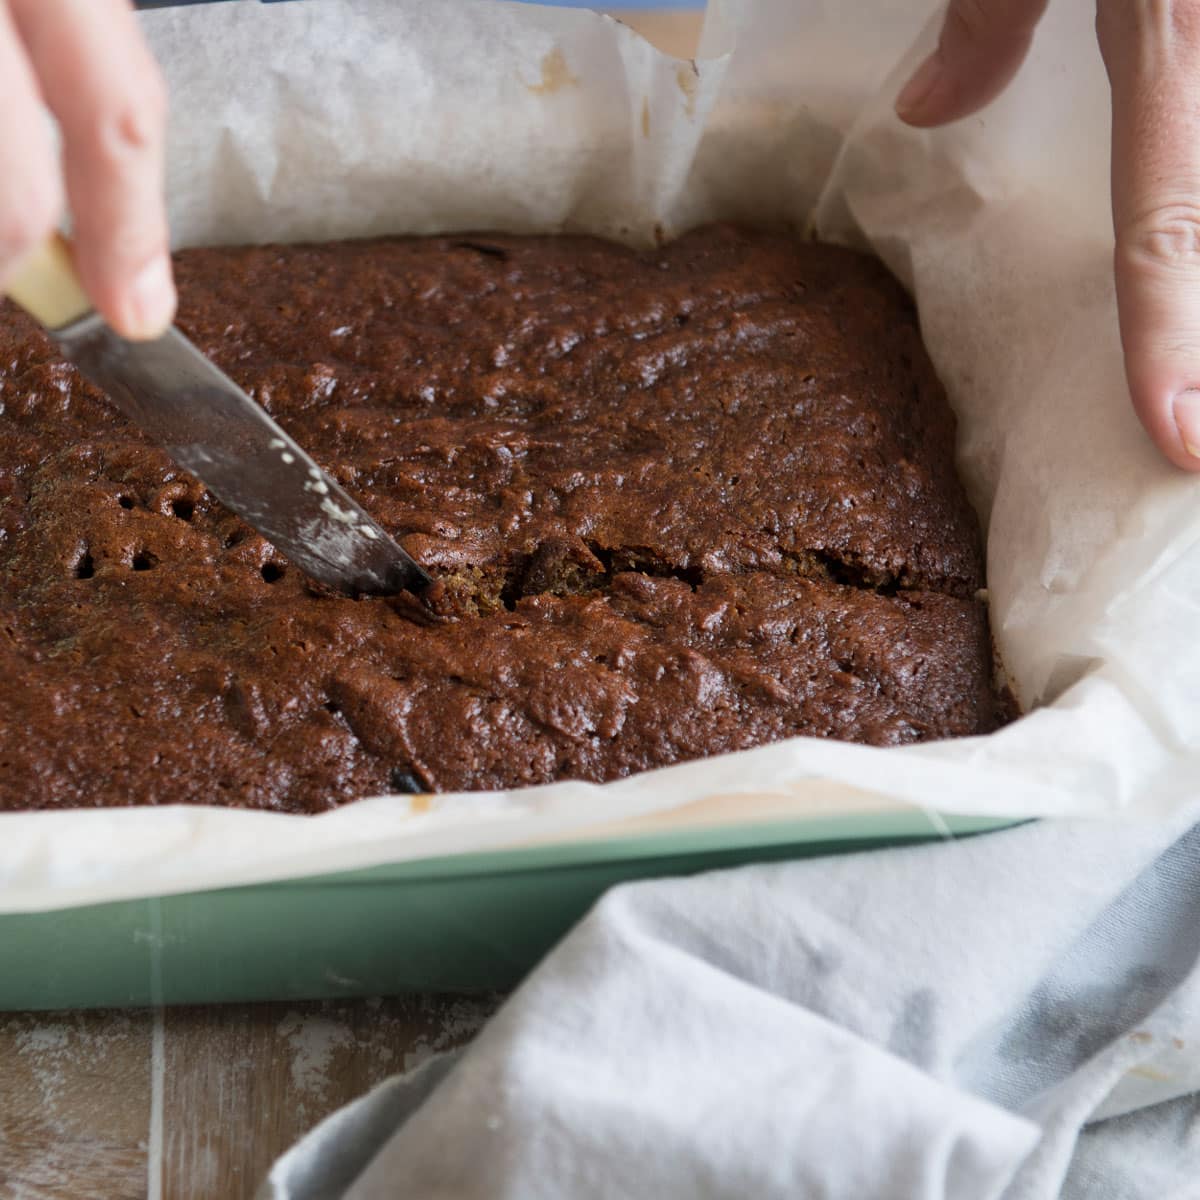 The size of the pan you choose can significantly affect the brownies' thickness and the baking time required.